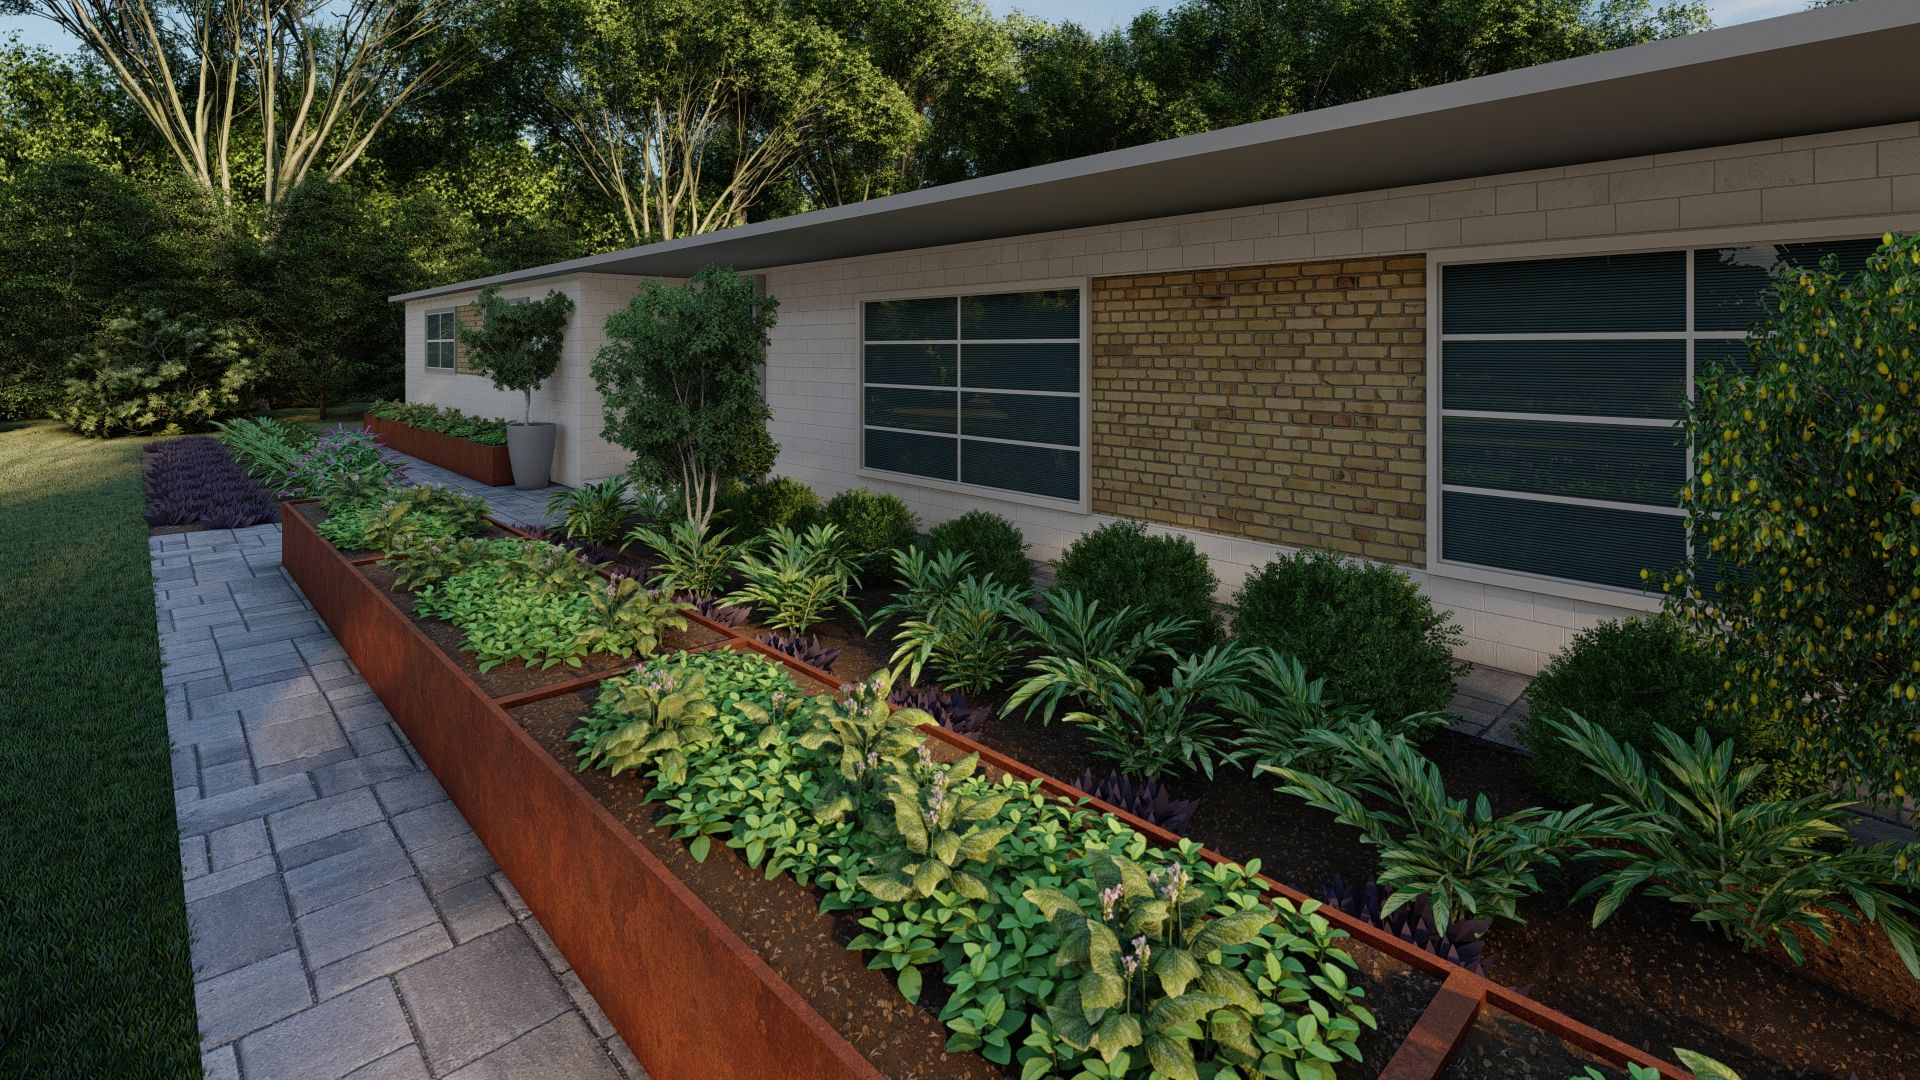 curb appeal for a front yard landscaping plan with shade trees, low maintenance plants, evergreen foliage and other plants